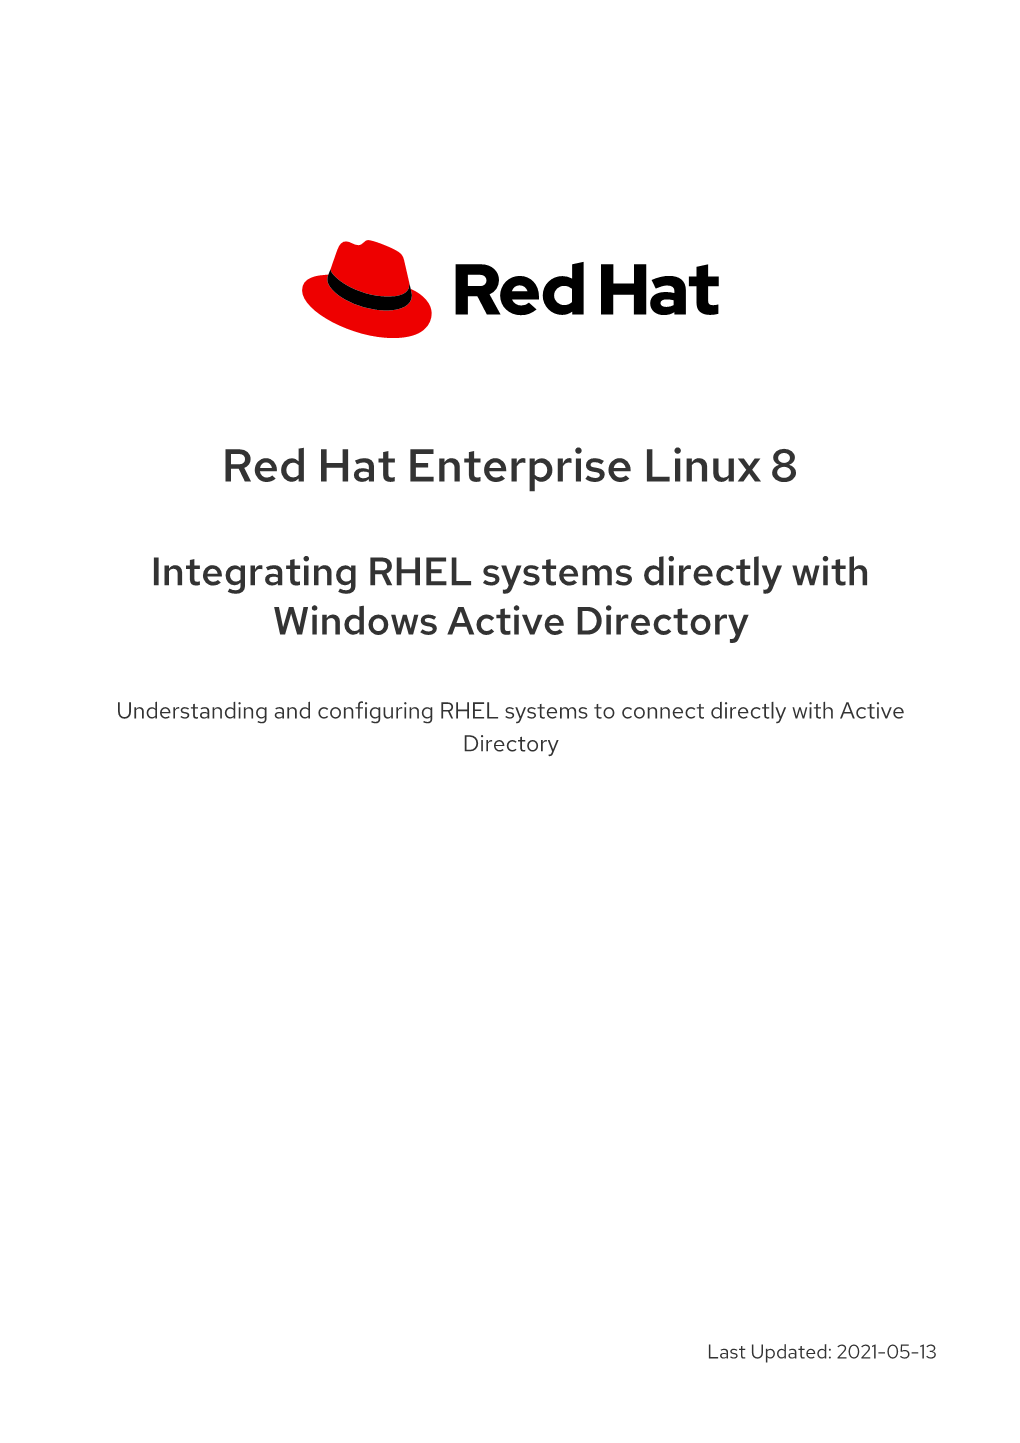 Integrating RHEL Systems Directly with Windows Active Directory